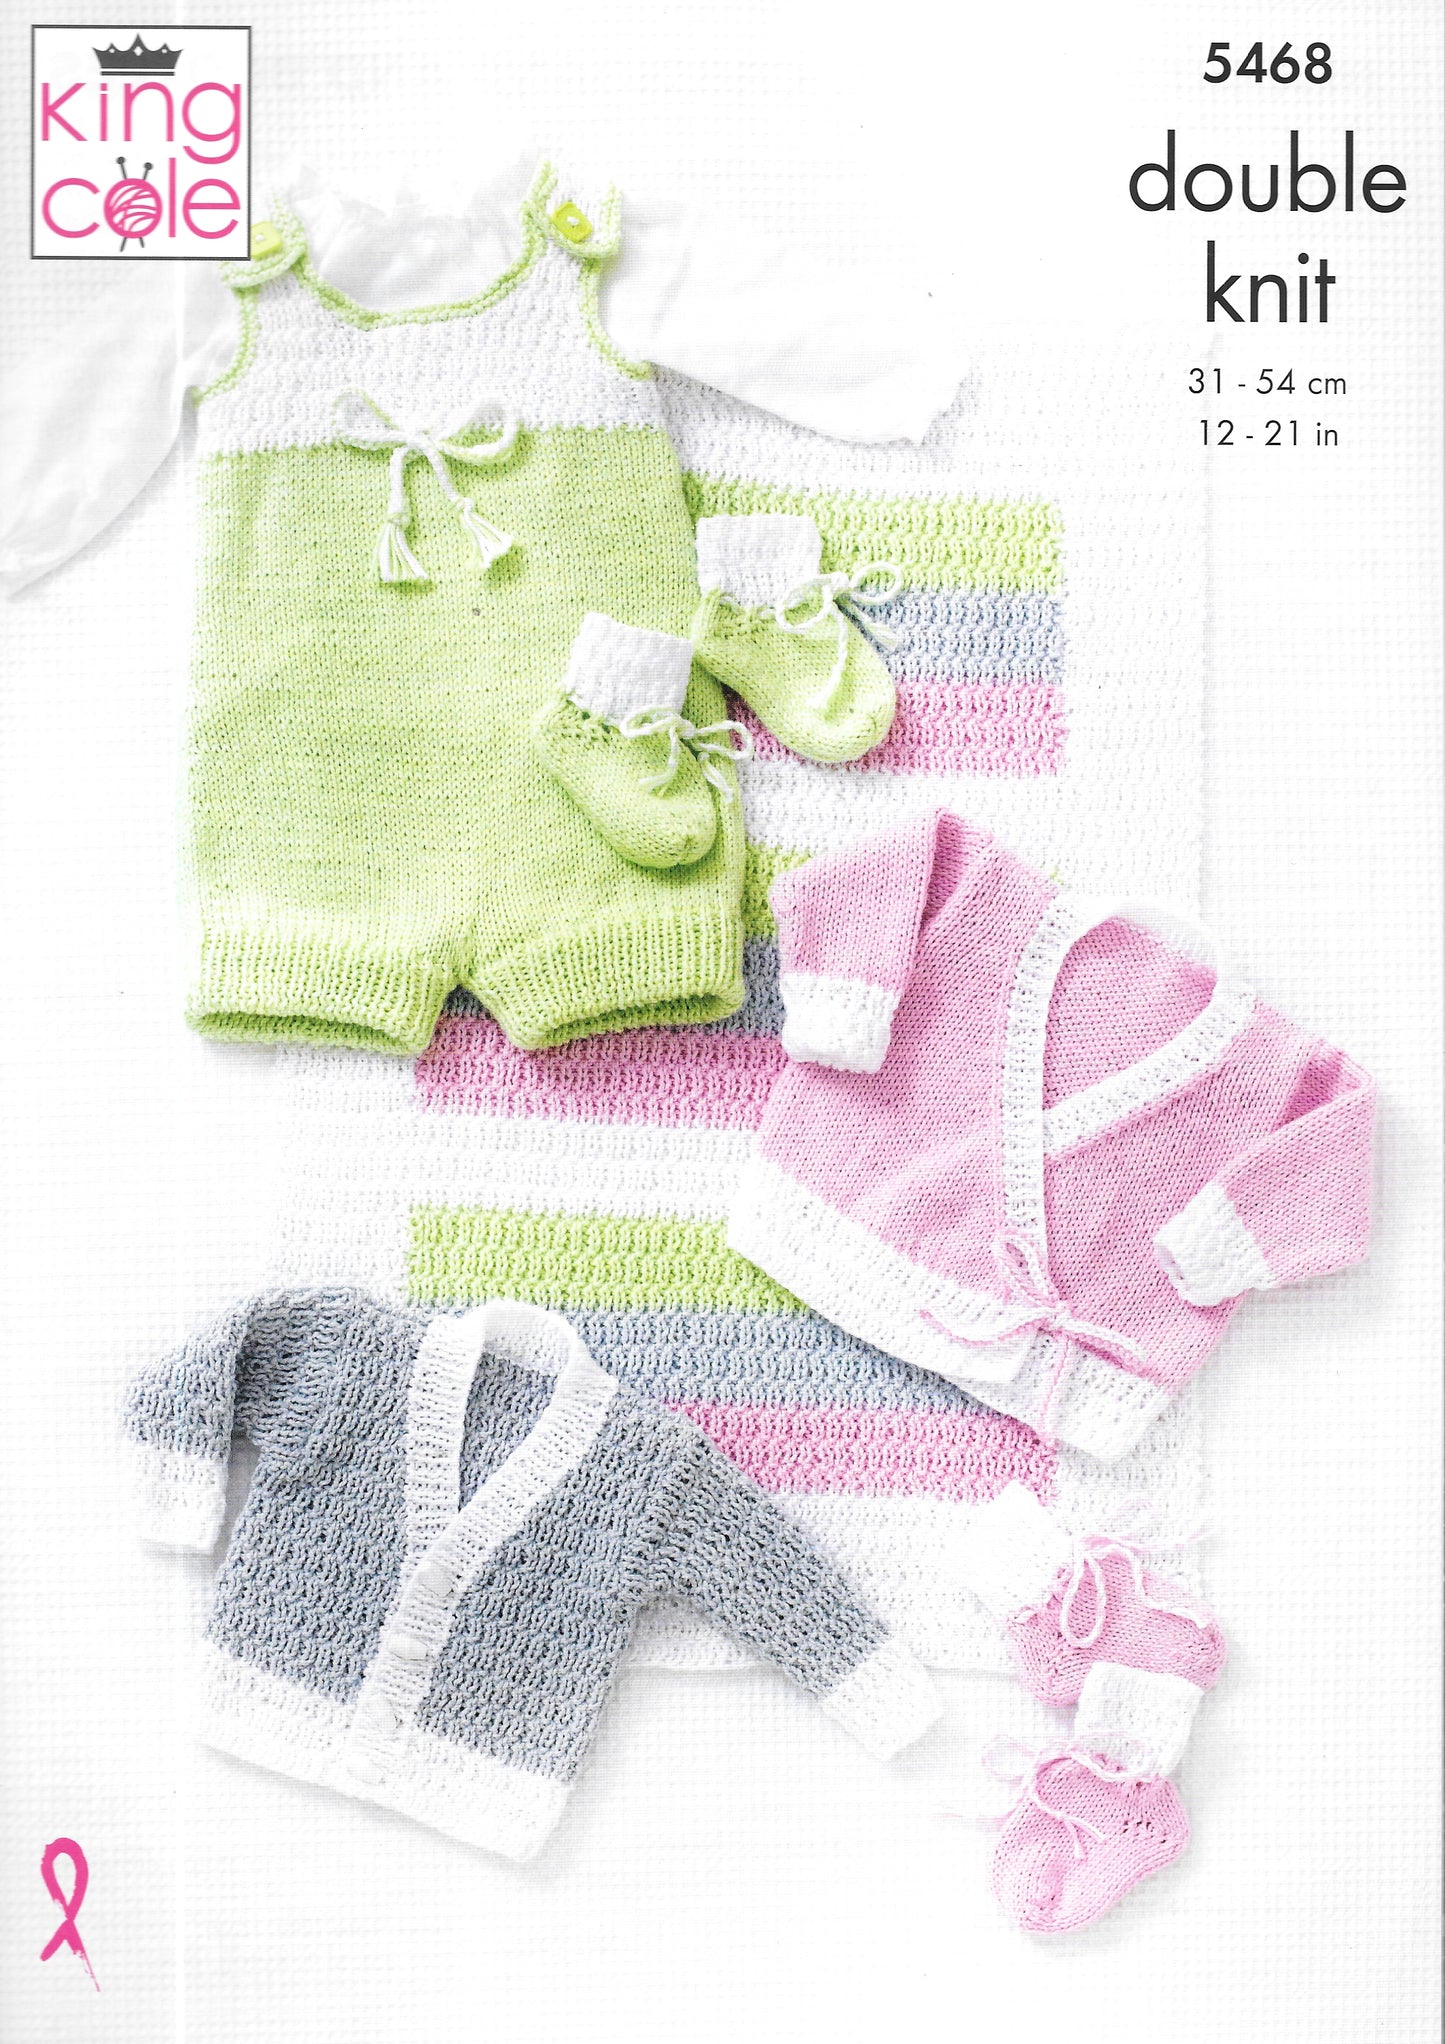 5468 King Cole double knit Blanket/Romper/Cardigans/Bootees knitting pattern